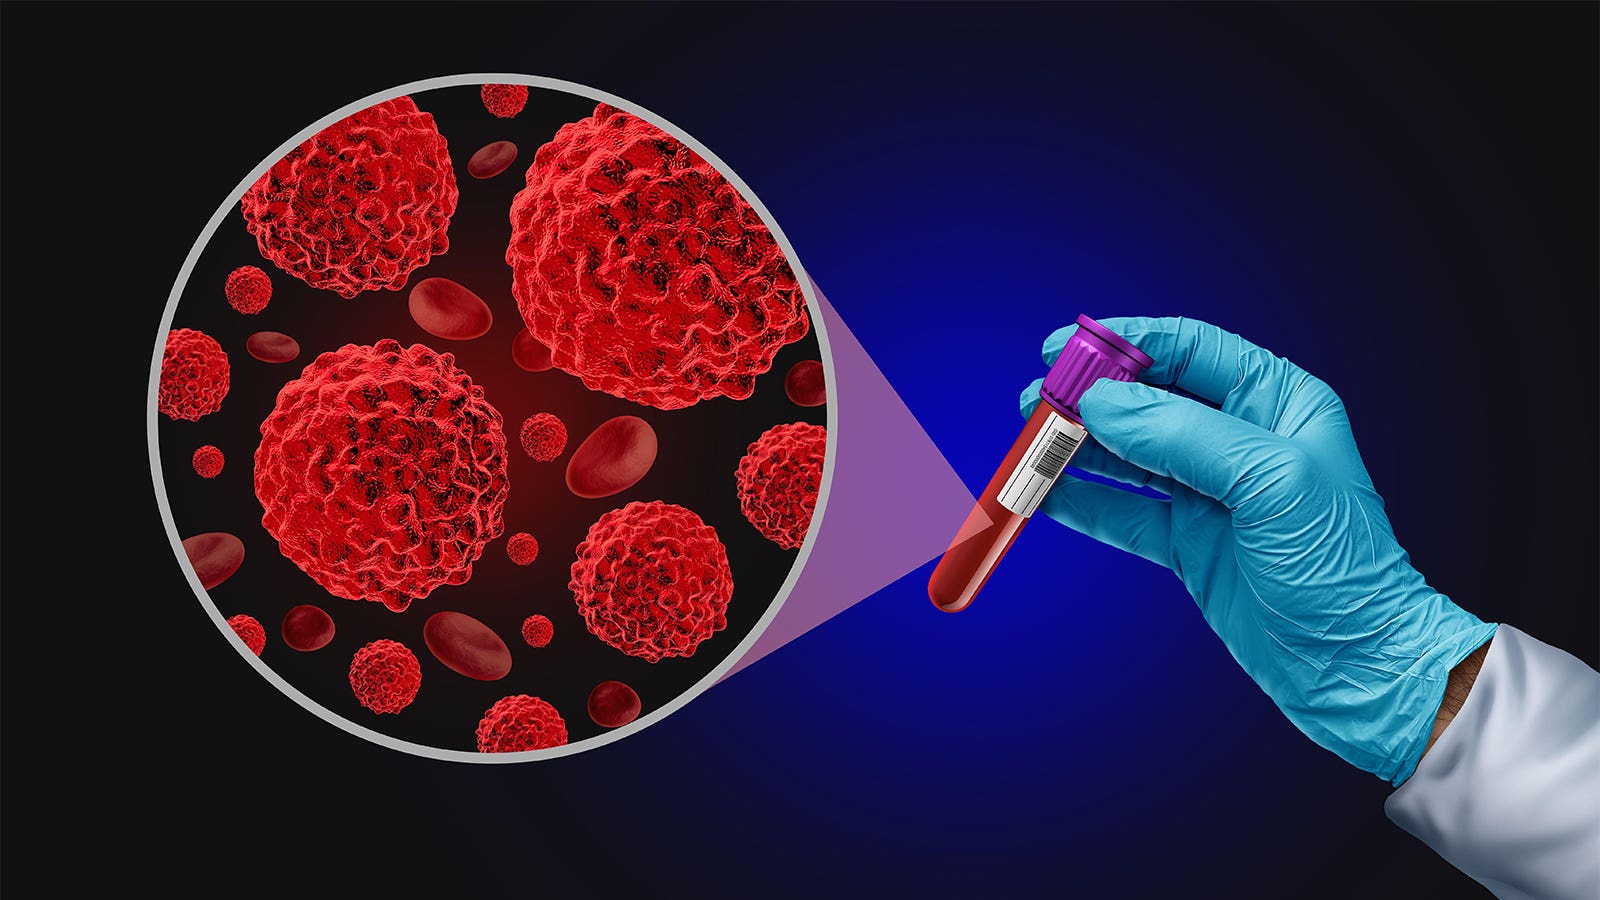 Liquid Biopsy for CRC Screening May Not Be Ready for Prime Time